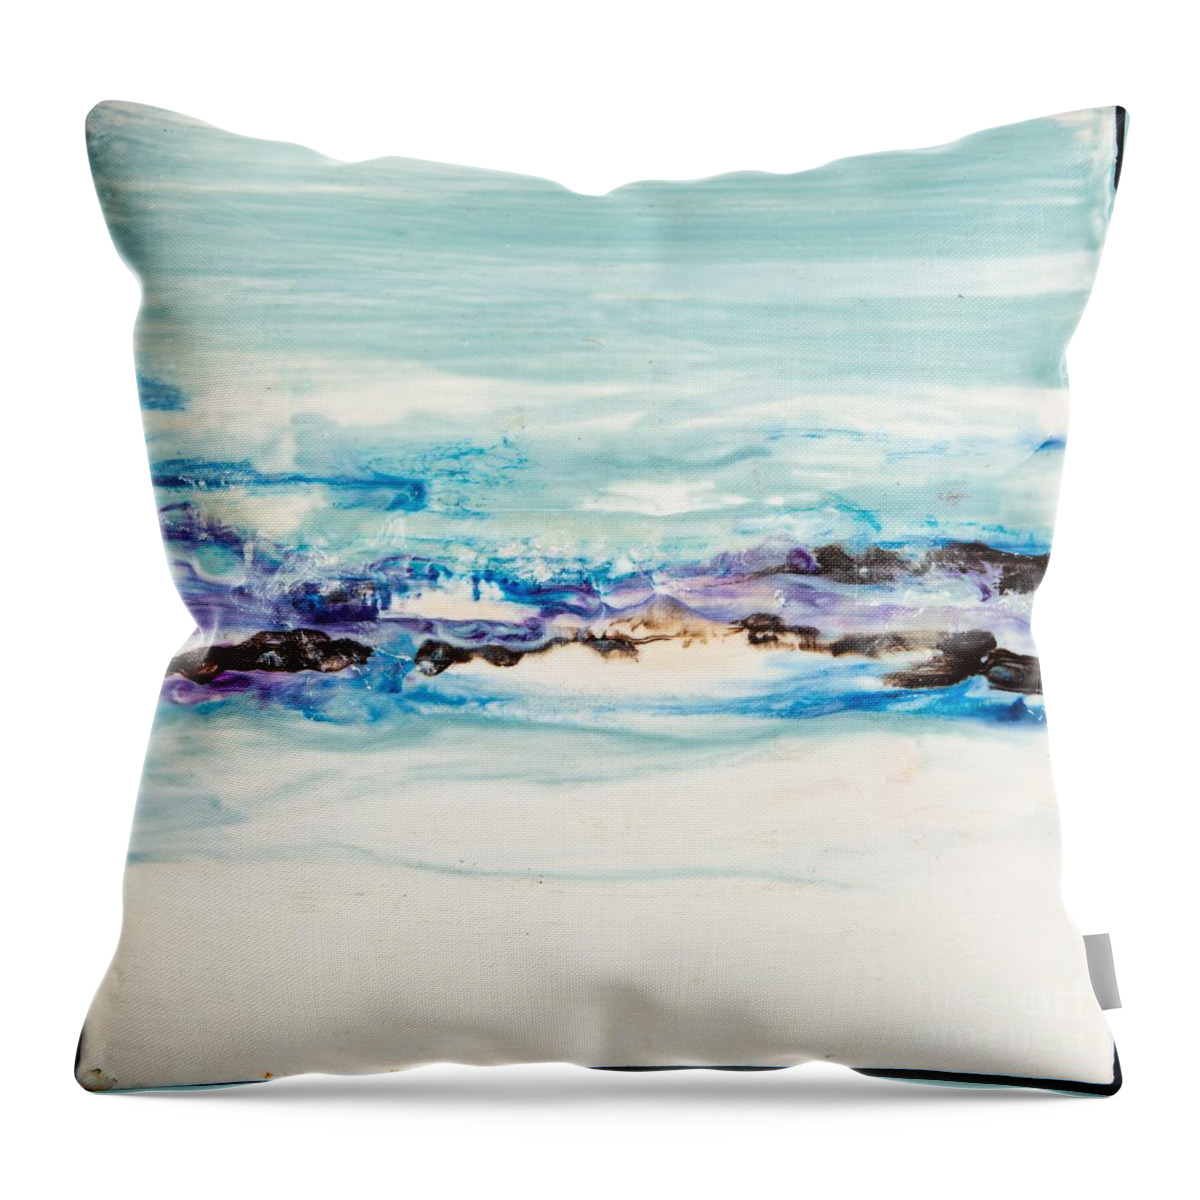 Abstract Throw Pillow featuring the digital art Seaside Series II - Colorful Abstract Contemporary Acrylic Painting by Sambel Pedes